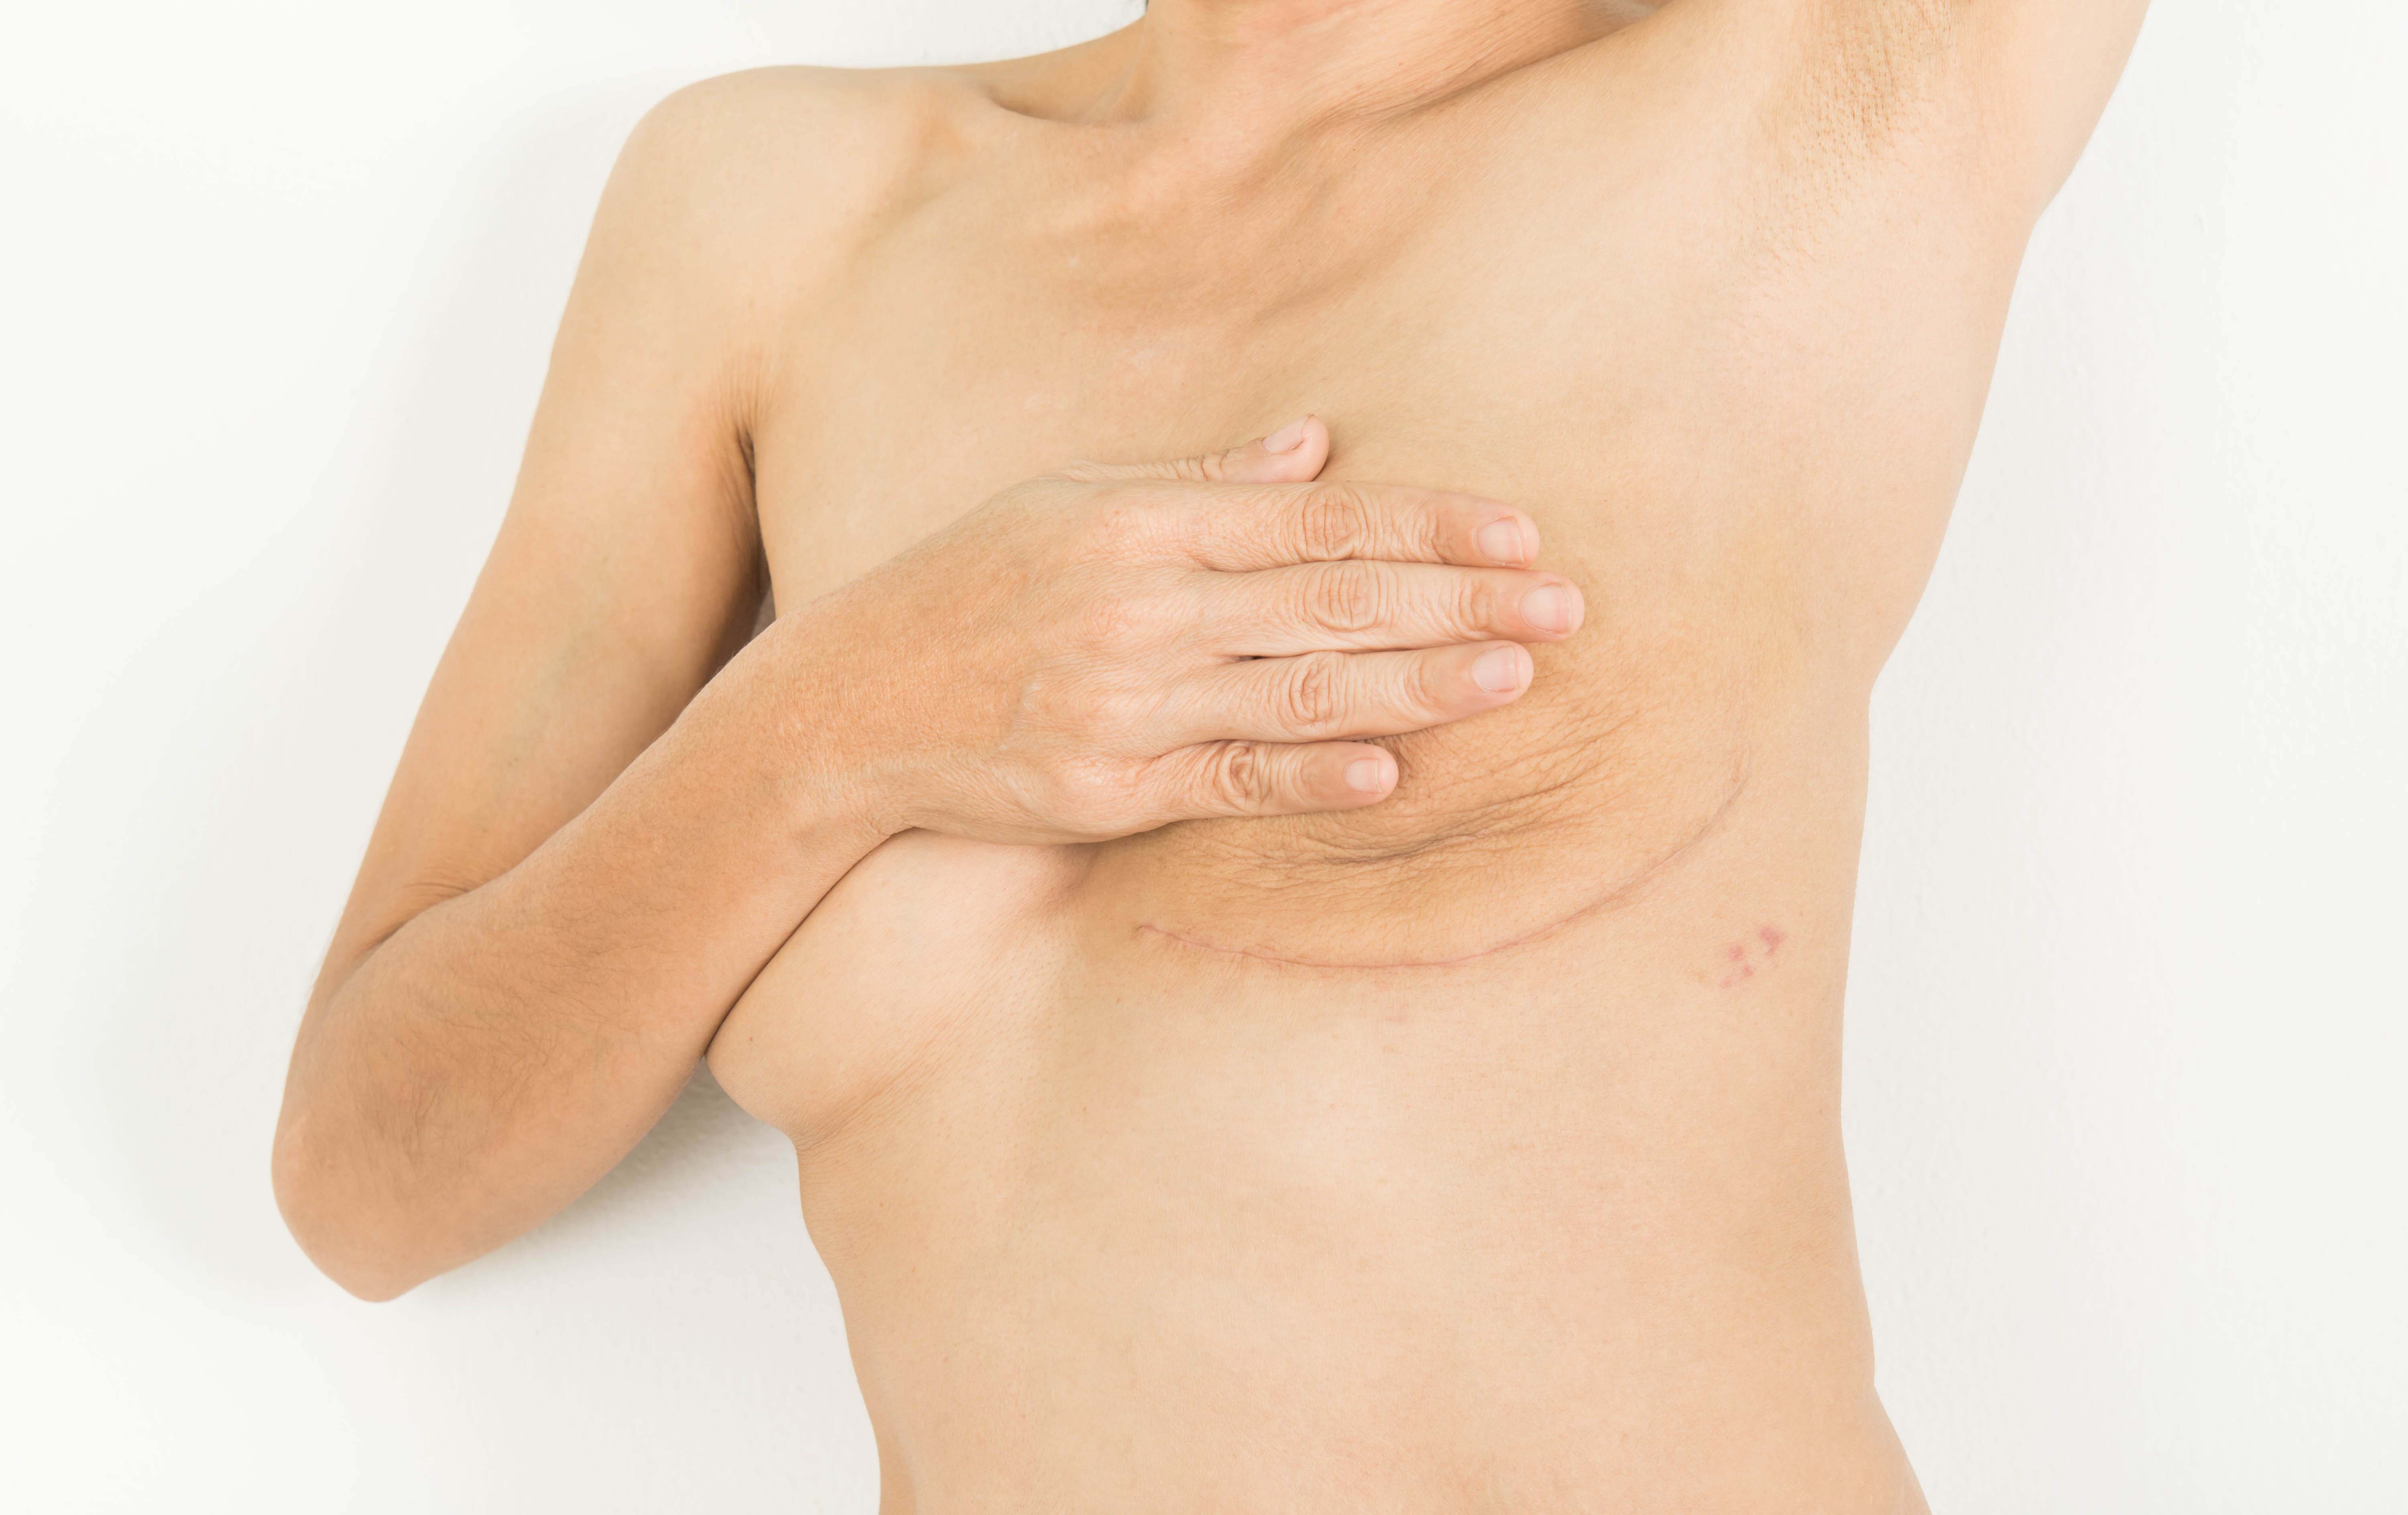 reconstruction is not the only post mastectomy option